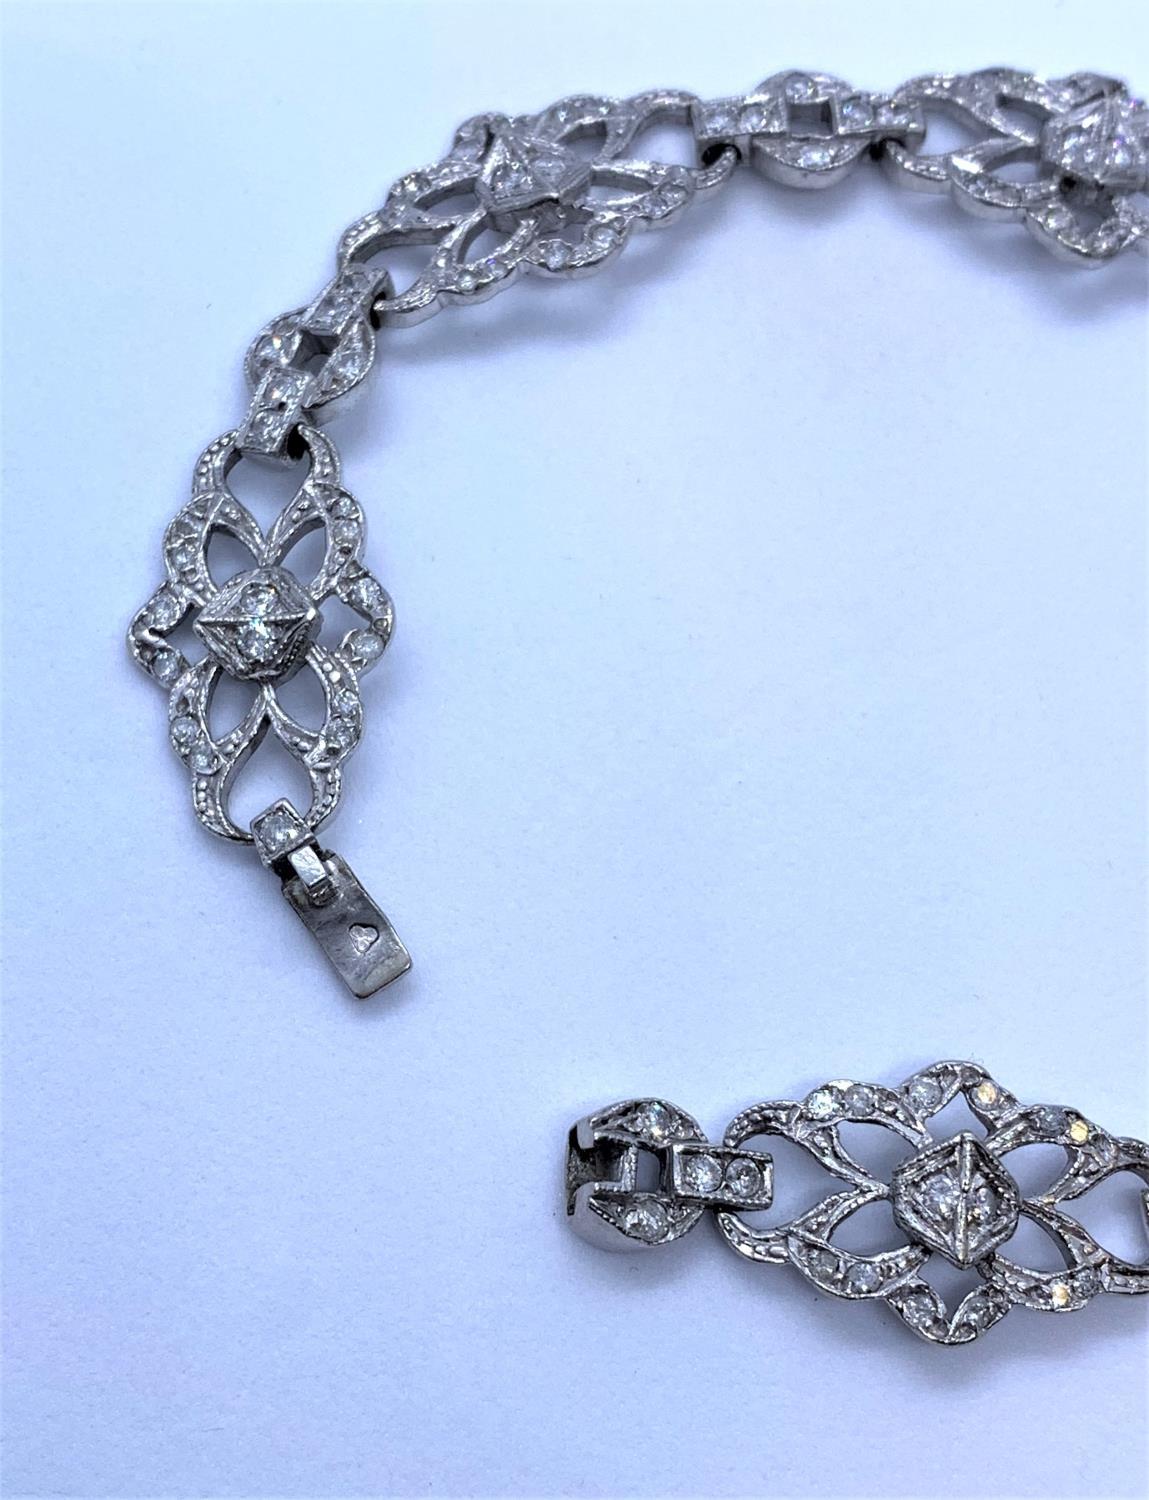 Diamond Encrusted 18K White Gold Bracelet, weight 17.3g and 18cm long approx - Image 3 of 4